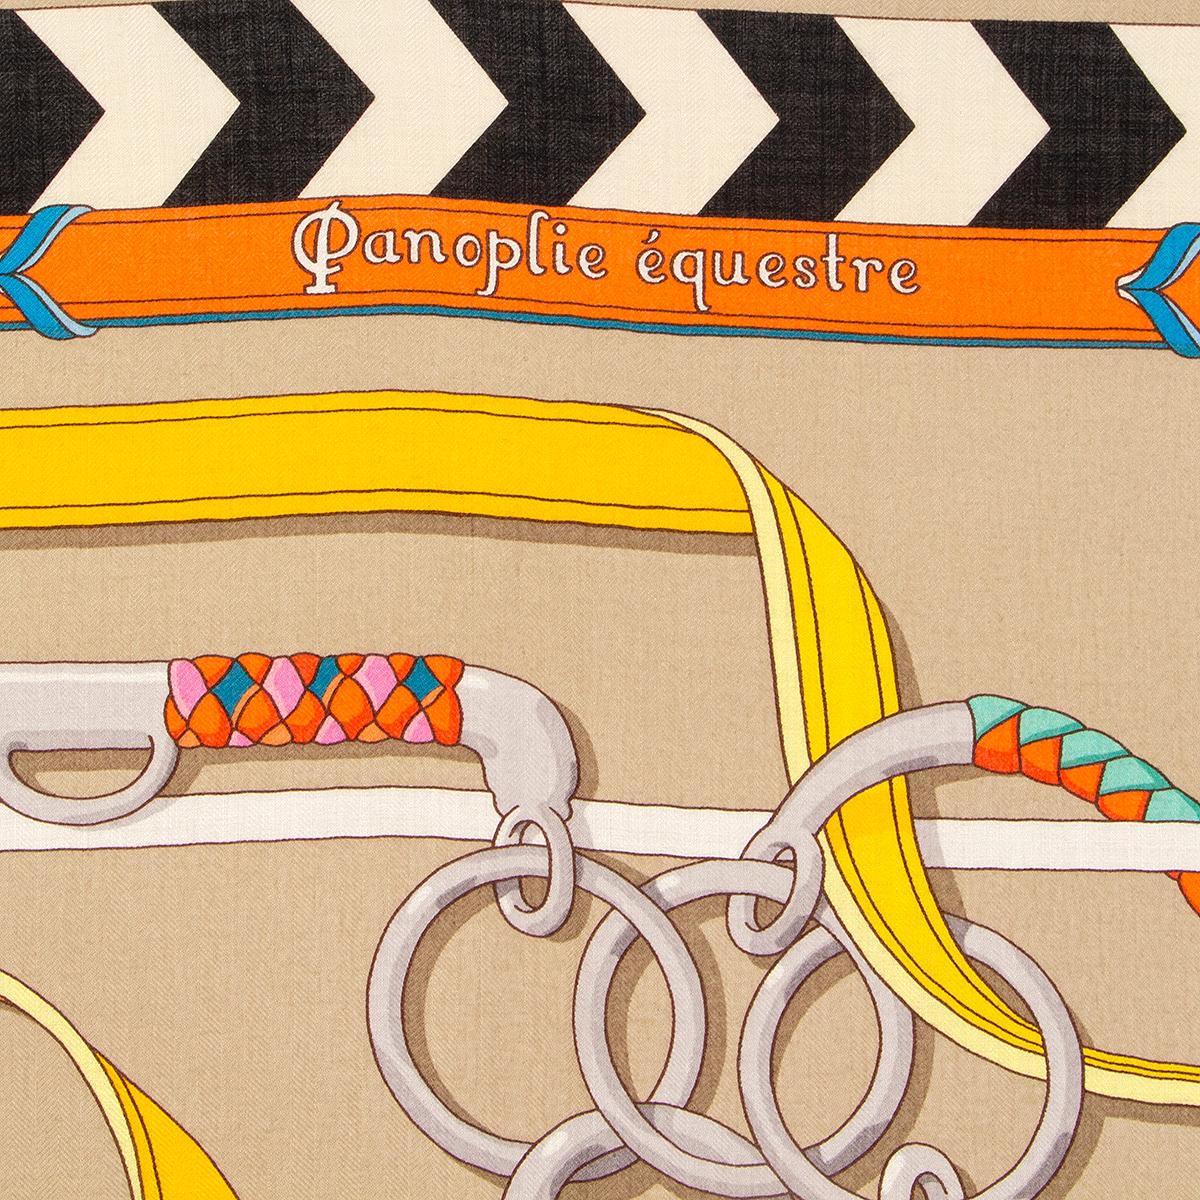 Hermes 'Panoplie Equestre 140' shawl by Virginie Jamin in beige cashmere (70%) and silk (30%) with details in yellow, grey, mint, orange and black. Has been worn and is in excellent condition.

Width 140cm (55in)
Height 140cm (55in)